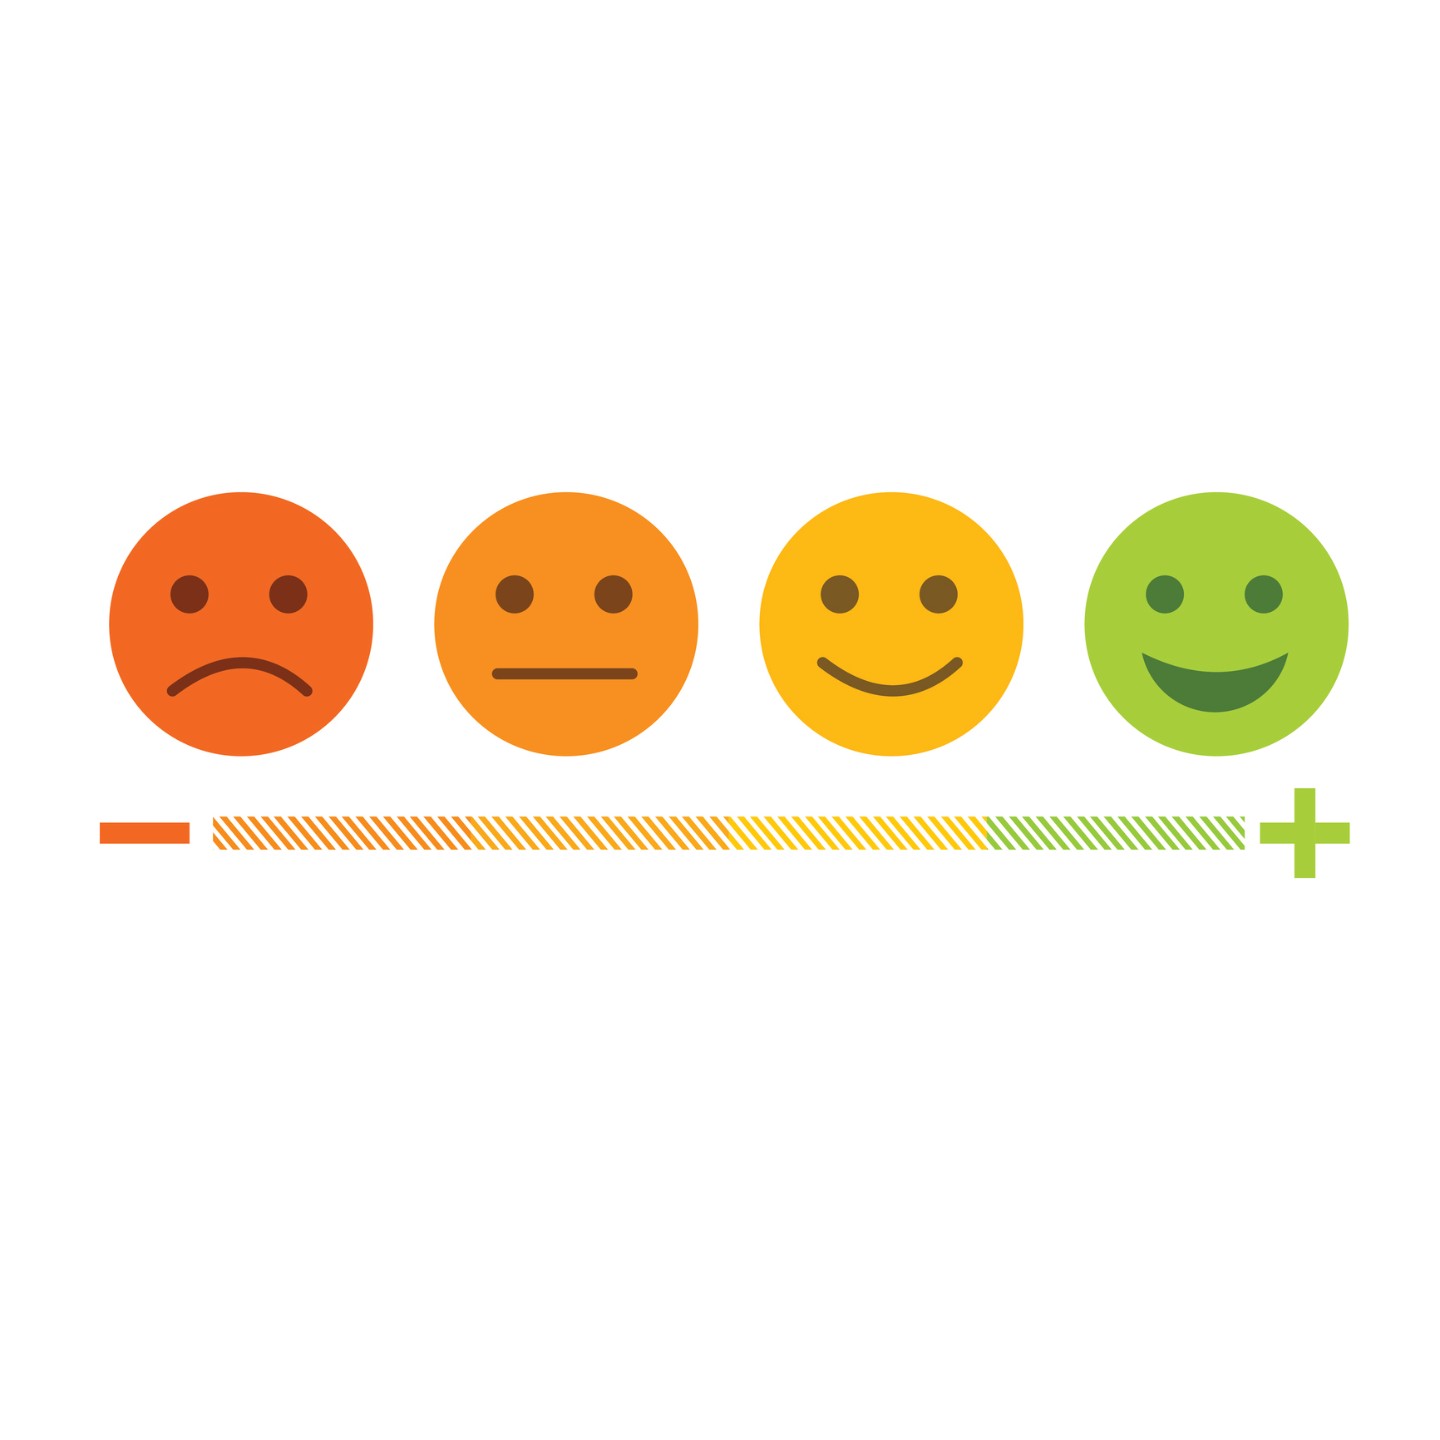 Feedback emoticon flat design icon set from negative to positive